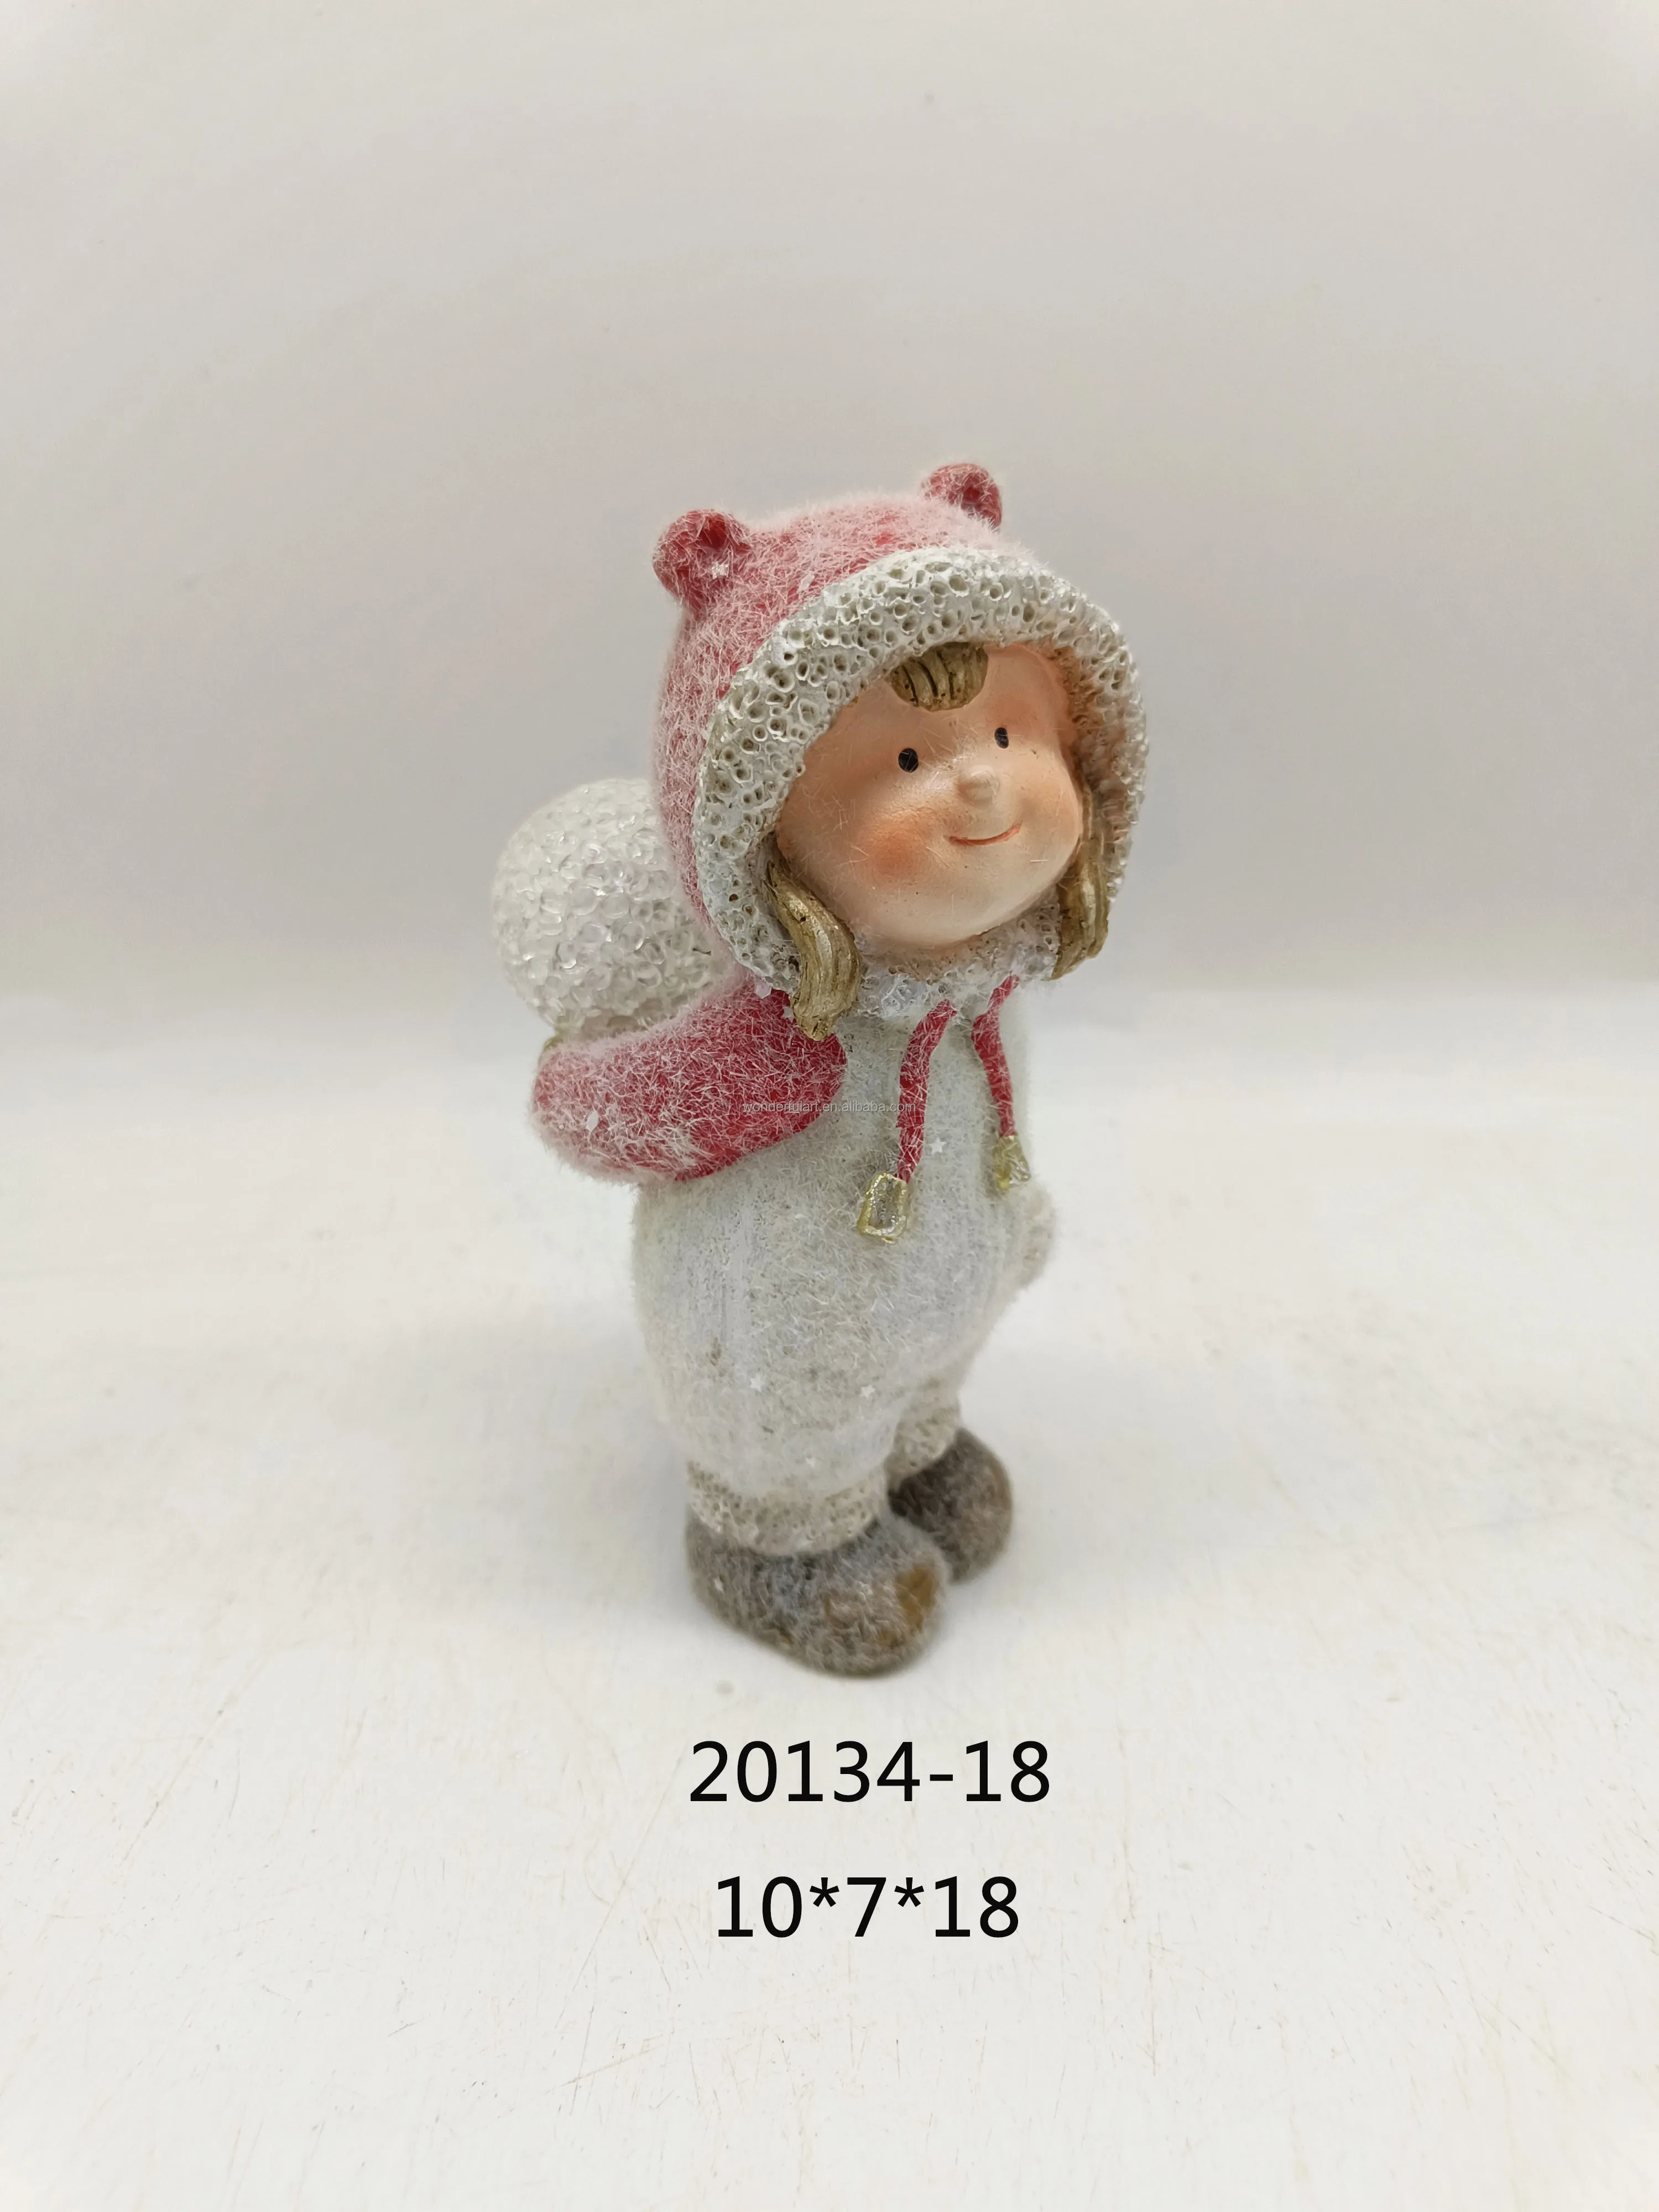 Cute Christmas Child Statue Winter Kid Figurine Resin Sculpture for Home Decor Desktop Decoration Gift for Garden and Holiday